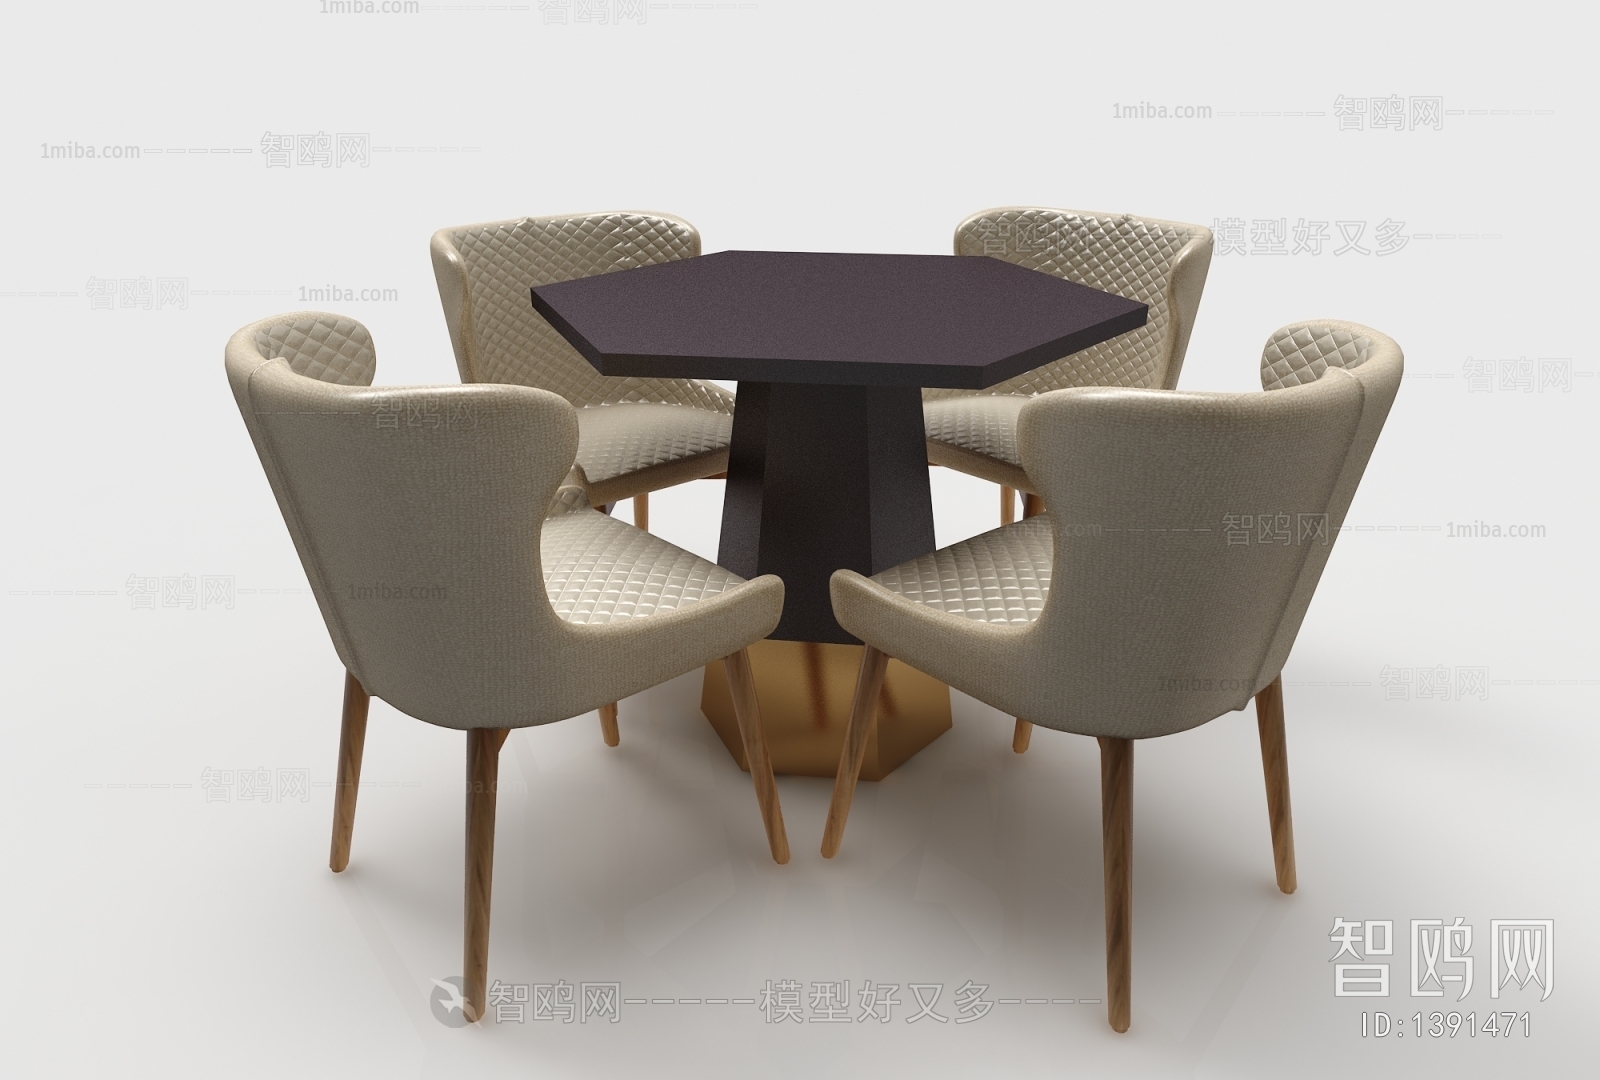 Southeast Asian Style Dining Table And Chairs